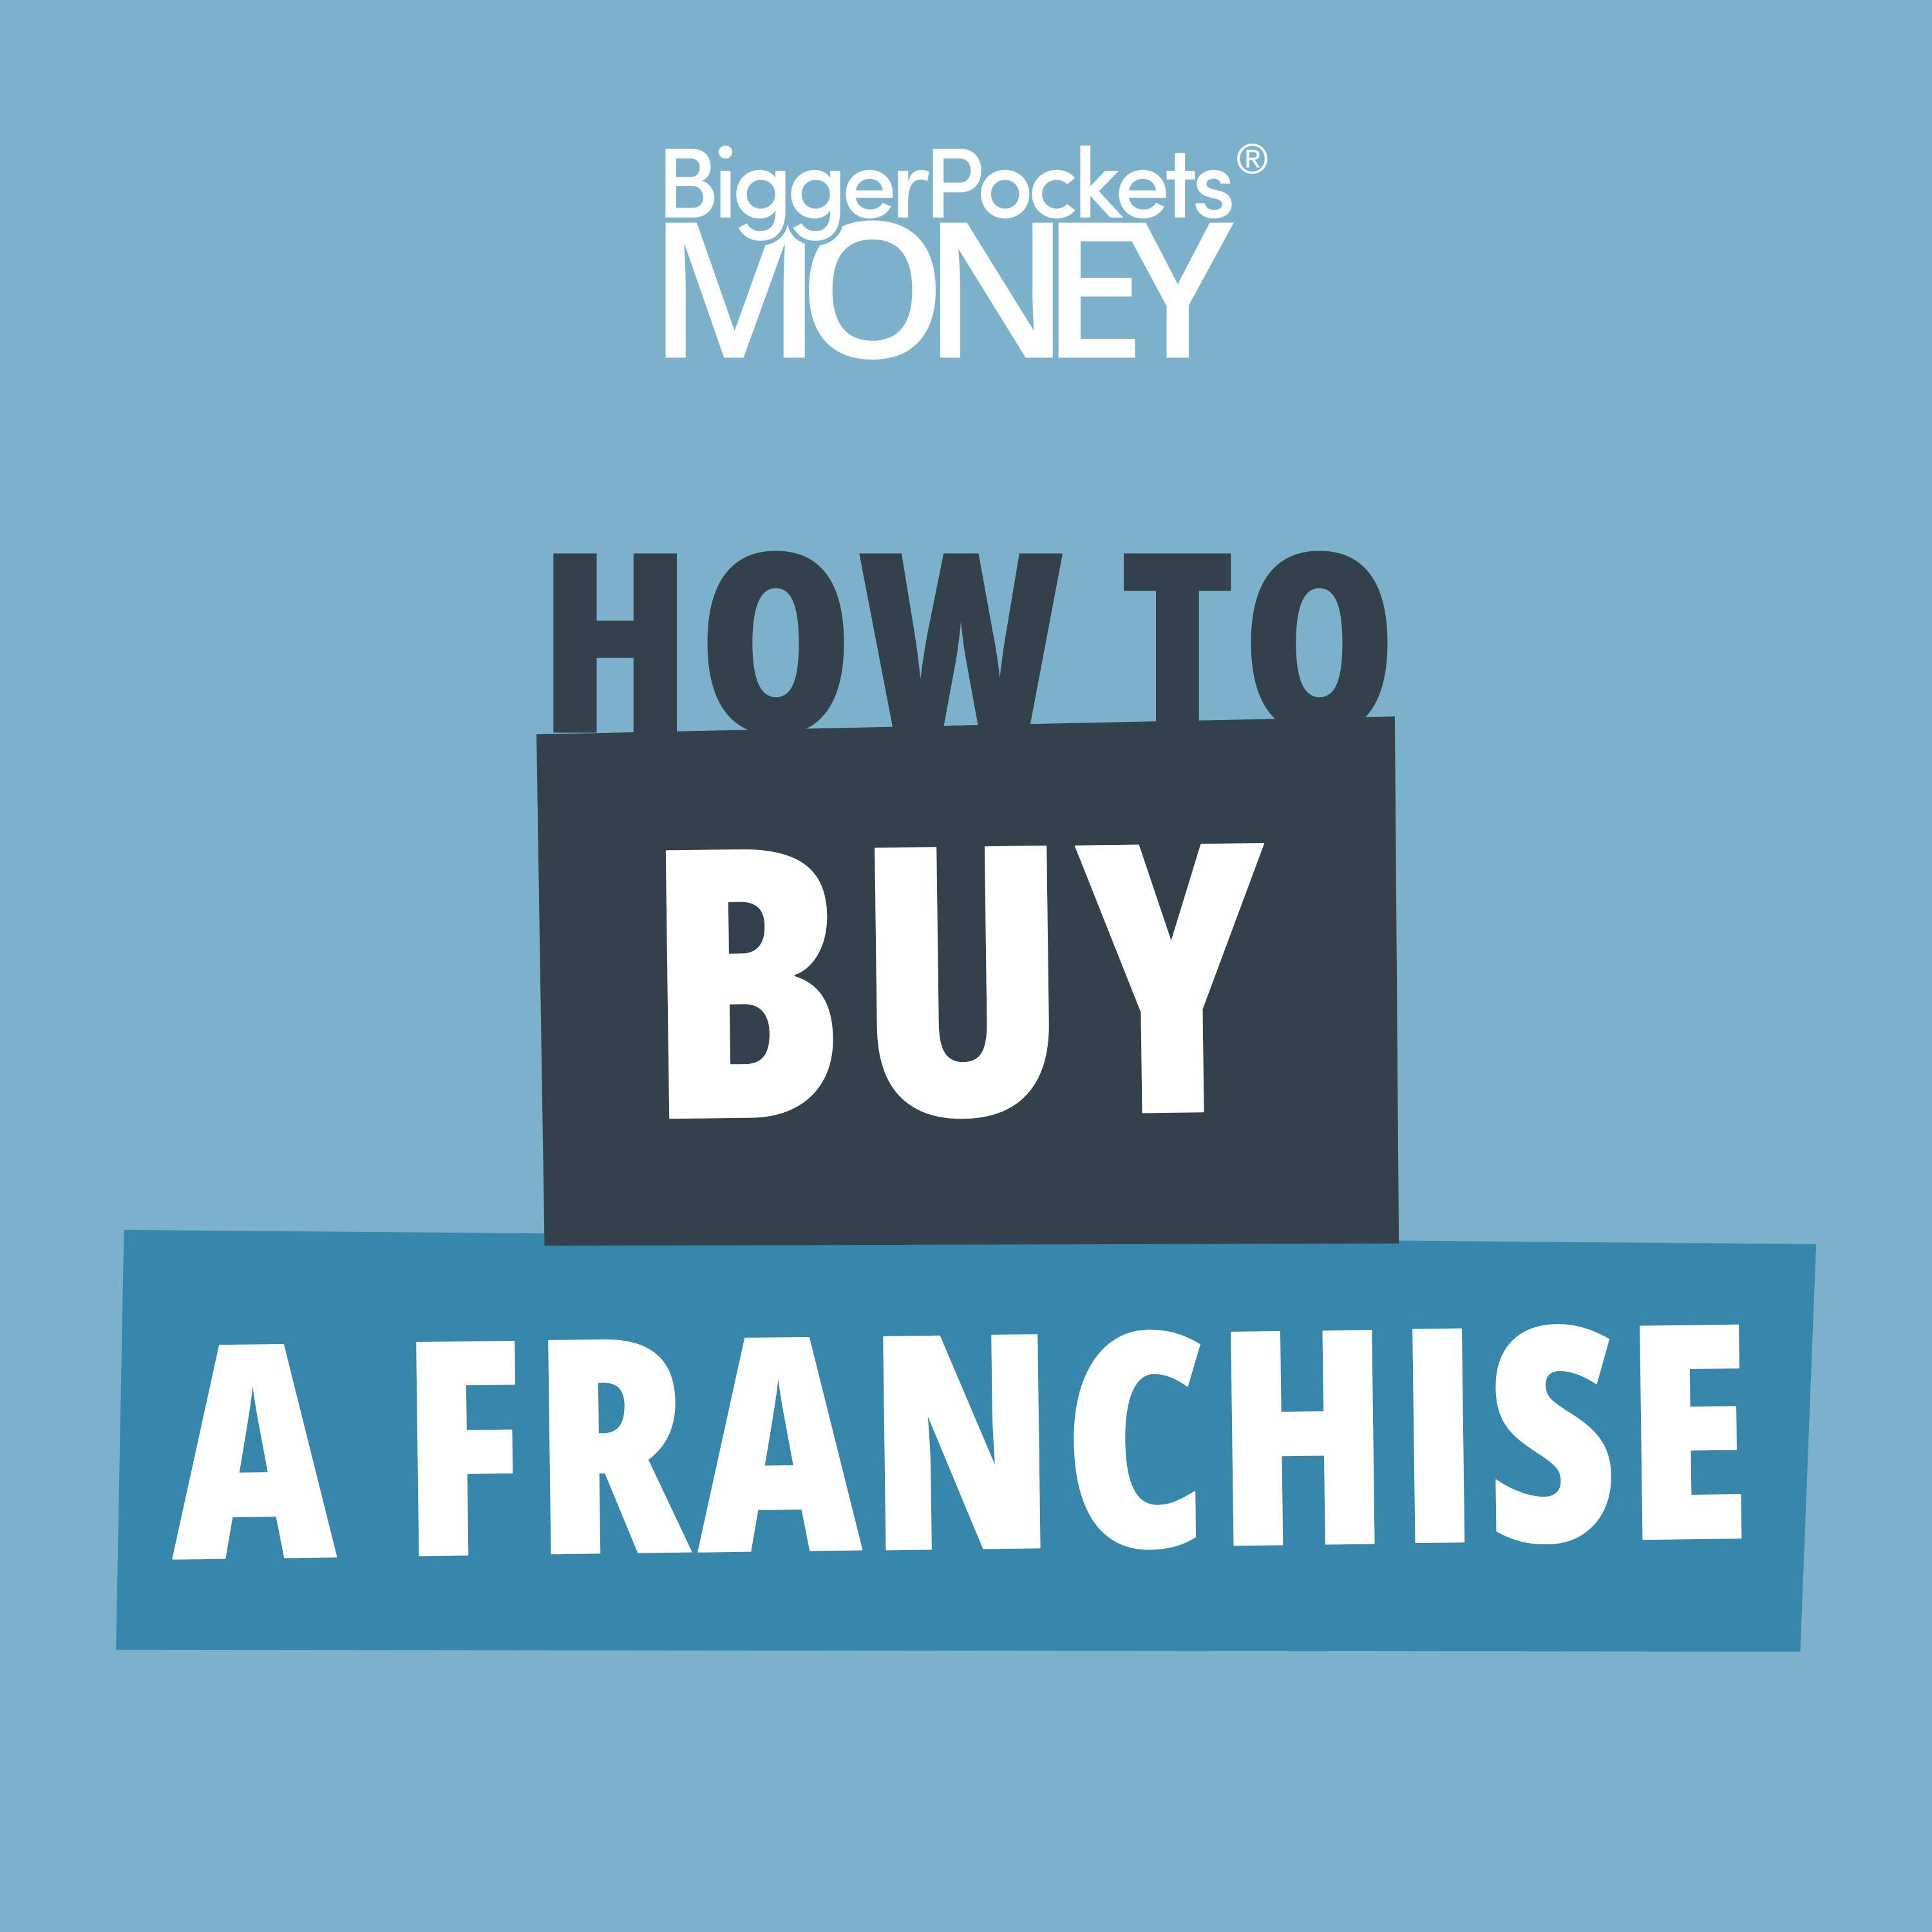 372: Franchises 101: How to Find, Fund, and Profit from Owning a Franchise